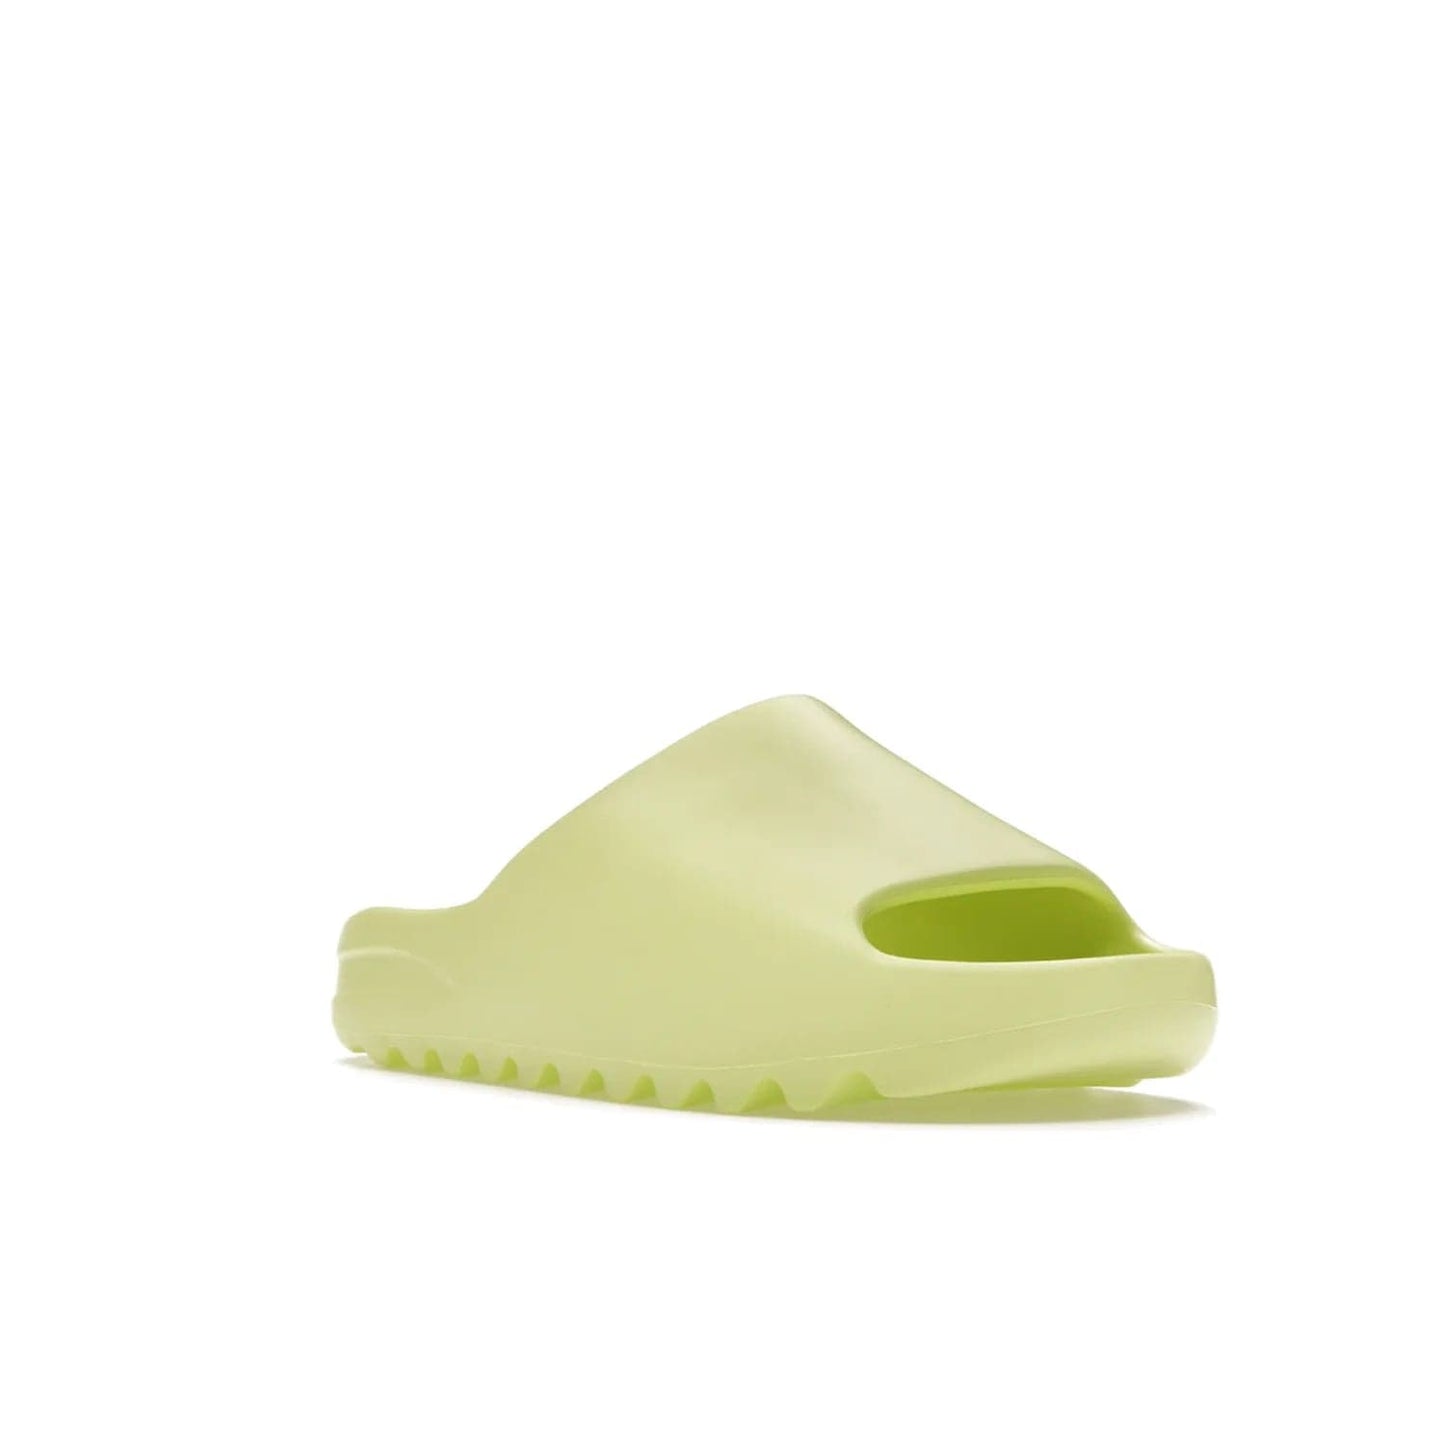 adidas Yeezy Slide Glow Green - Image 6 - Only at www.BallersClubKickz.com - Experience an unexpected summer style with the adidas Yeezy Slide Glow Green. This limited edition slide sandal provides a lightweight and durable construction and a bold Glow Green hue. Strategic grooves enhance traction and provide all-day comfort. Make a statement with the adidas Yeezy Slide Glow Green.